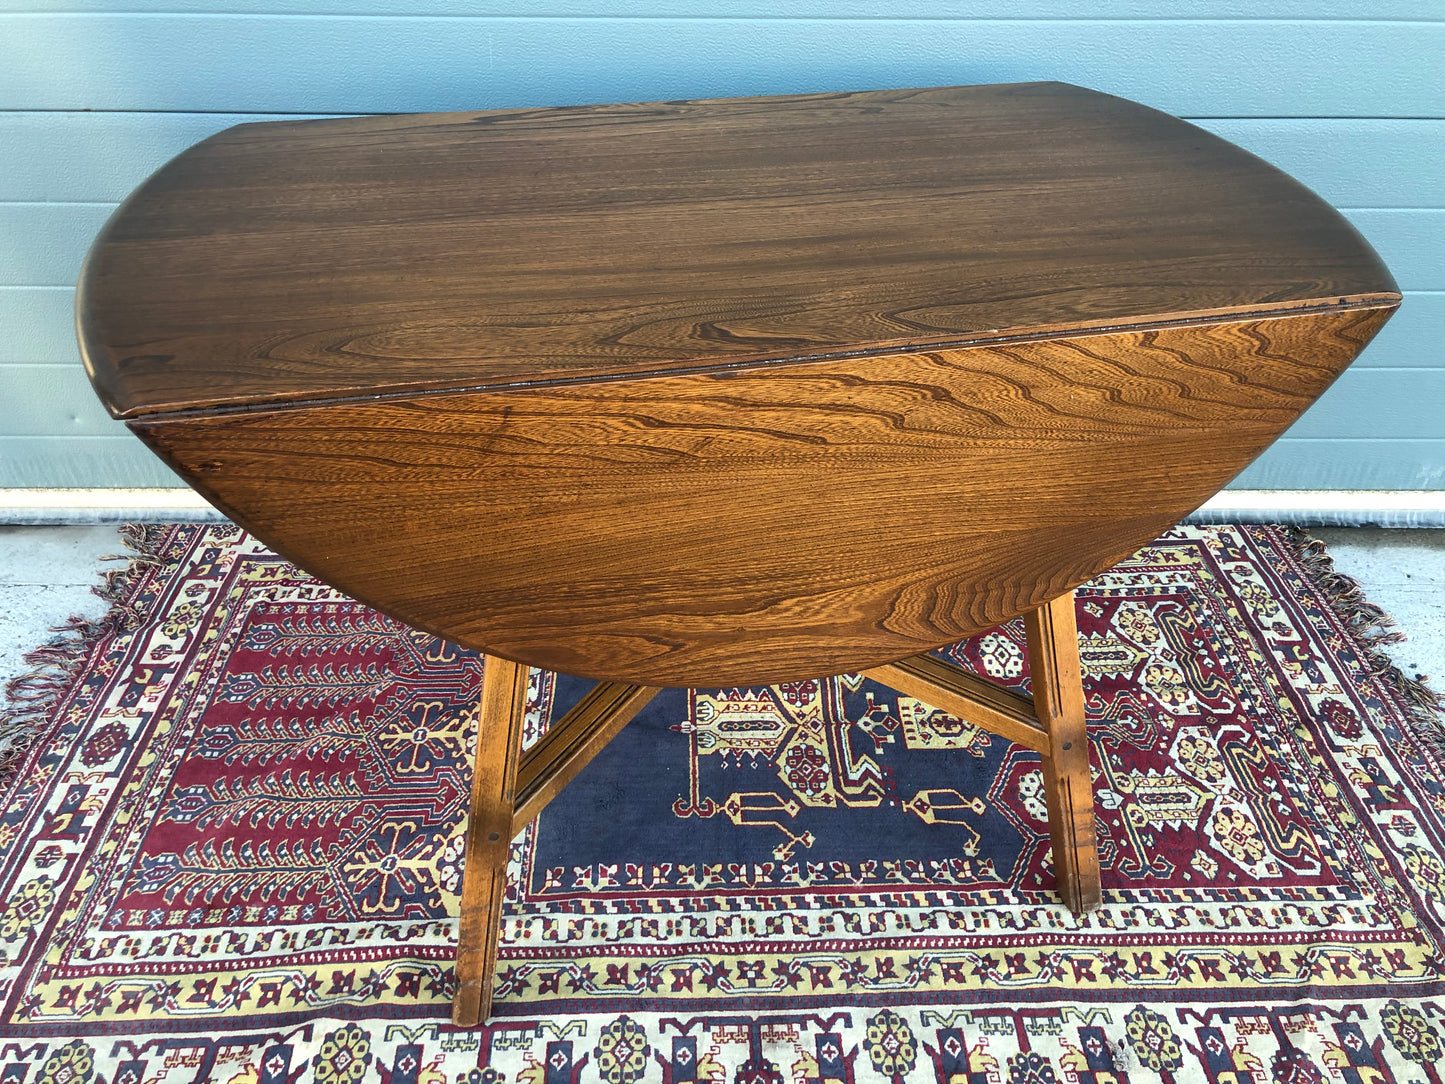 Ercol Dining Table / Ercol Dropleaf Kitchen Table ( SOLD )